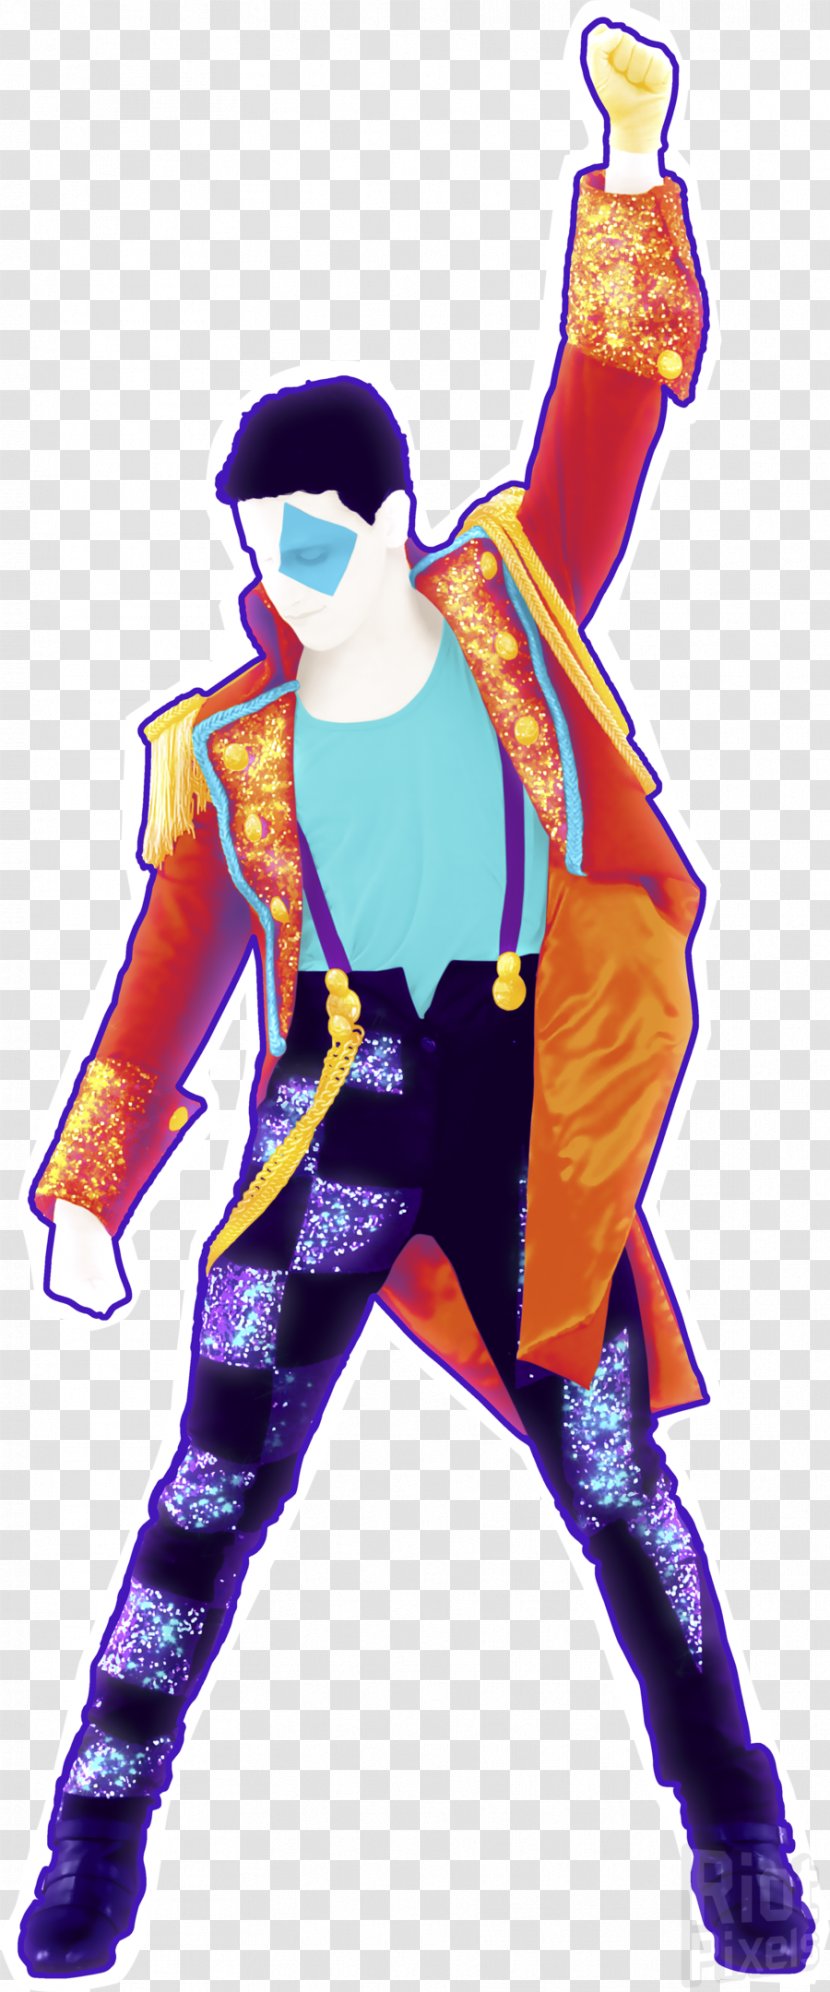 Just Dance 2017 2016 2018 Now Wii Transparent PNG